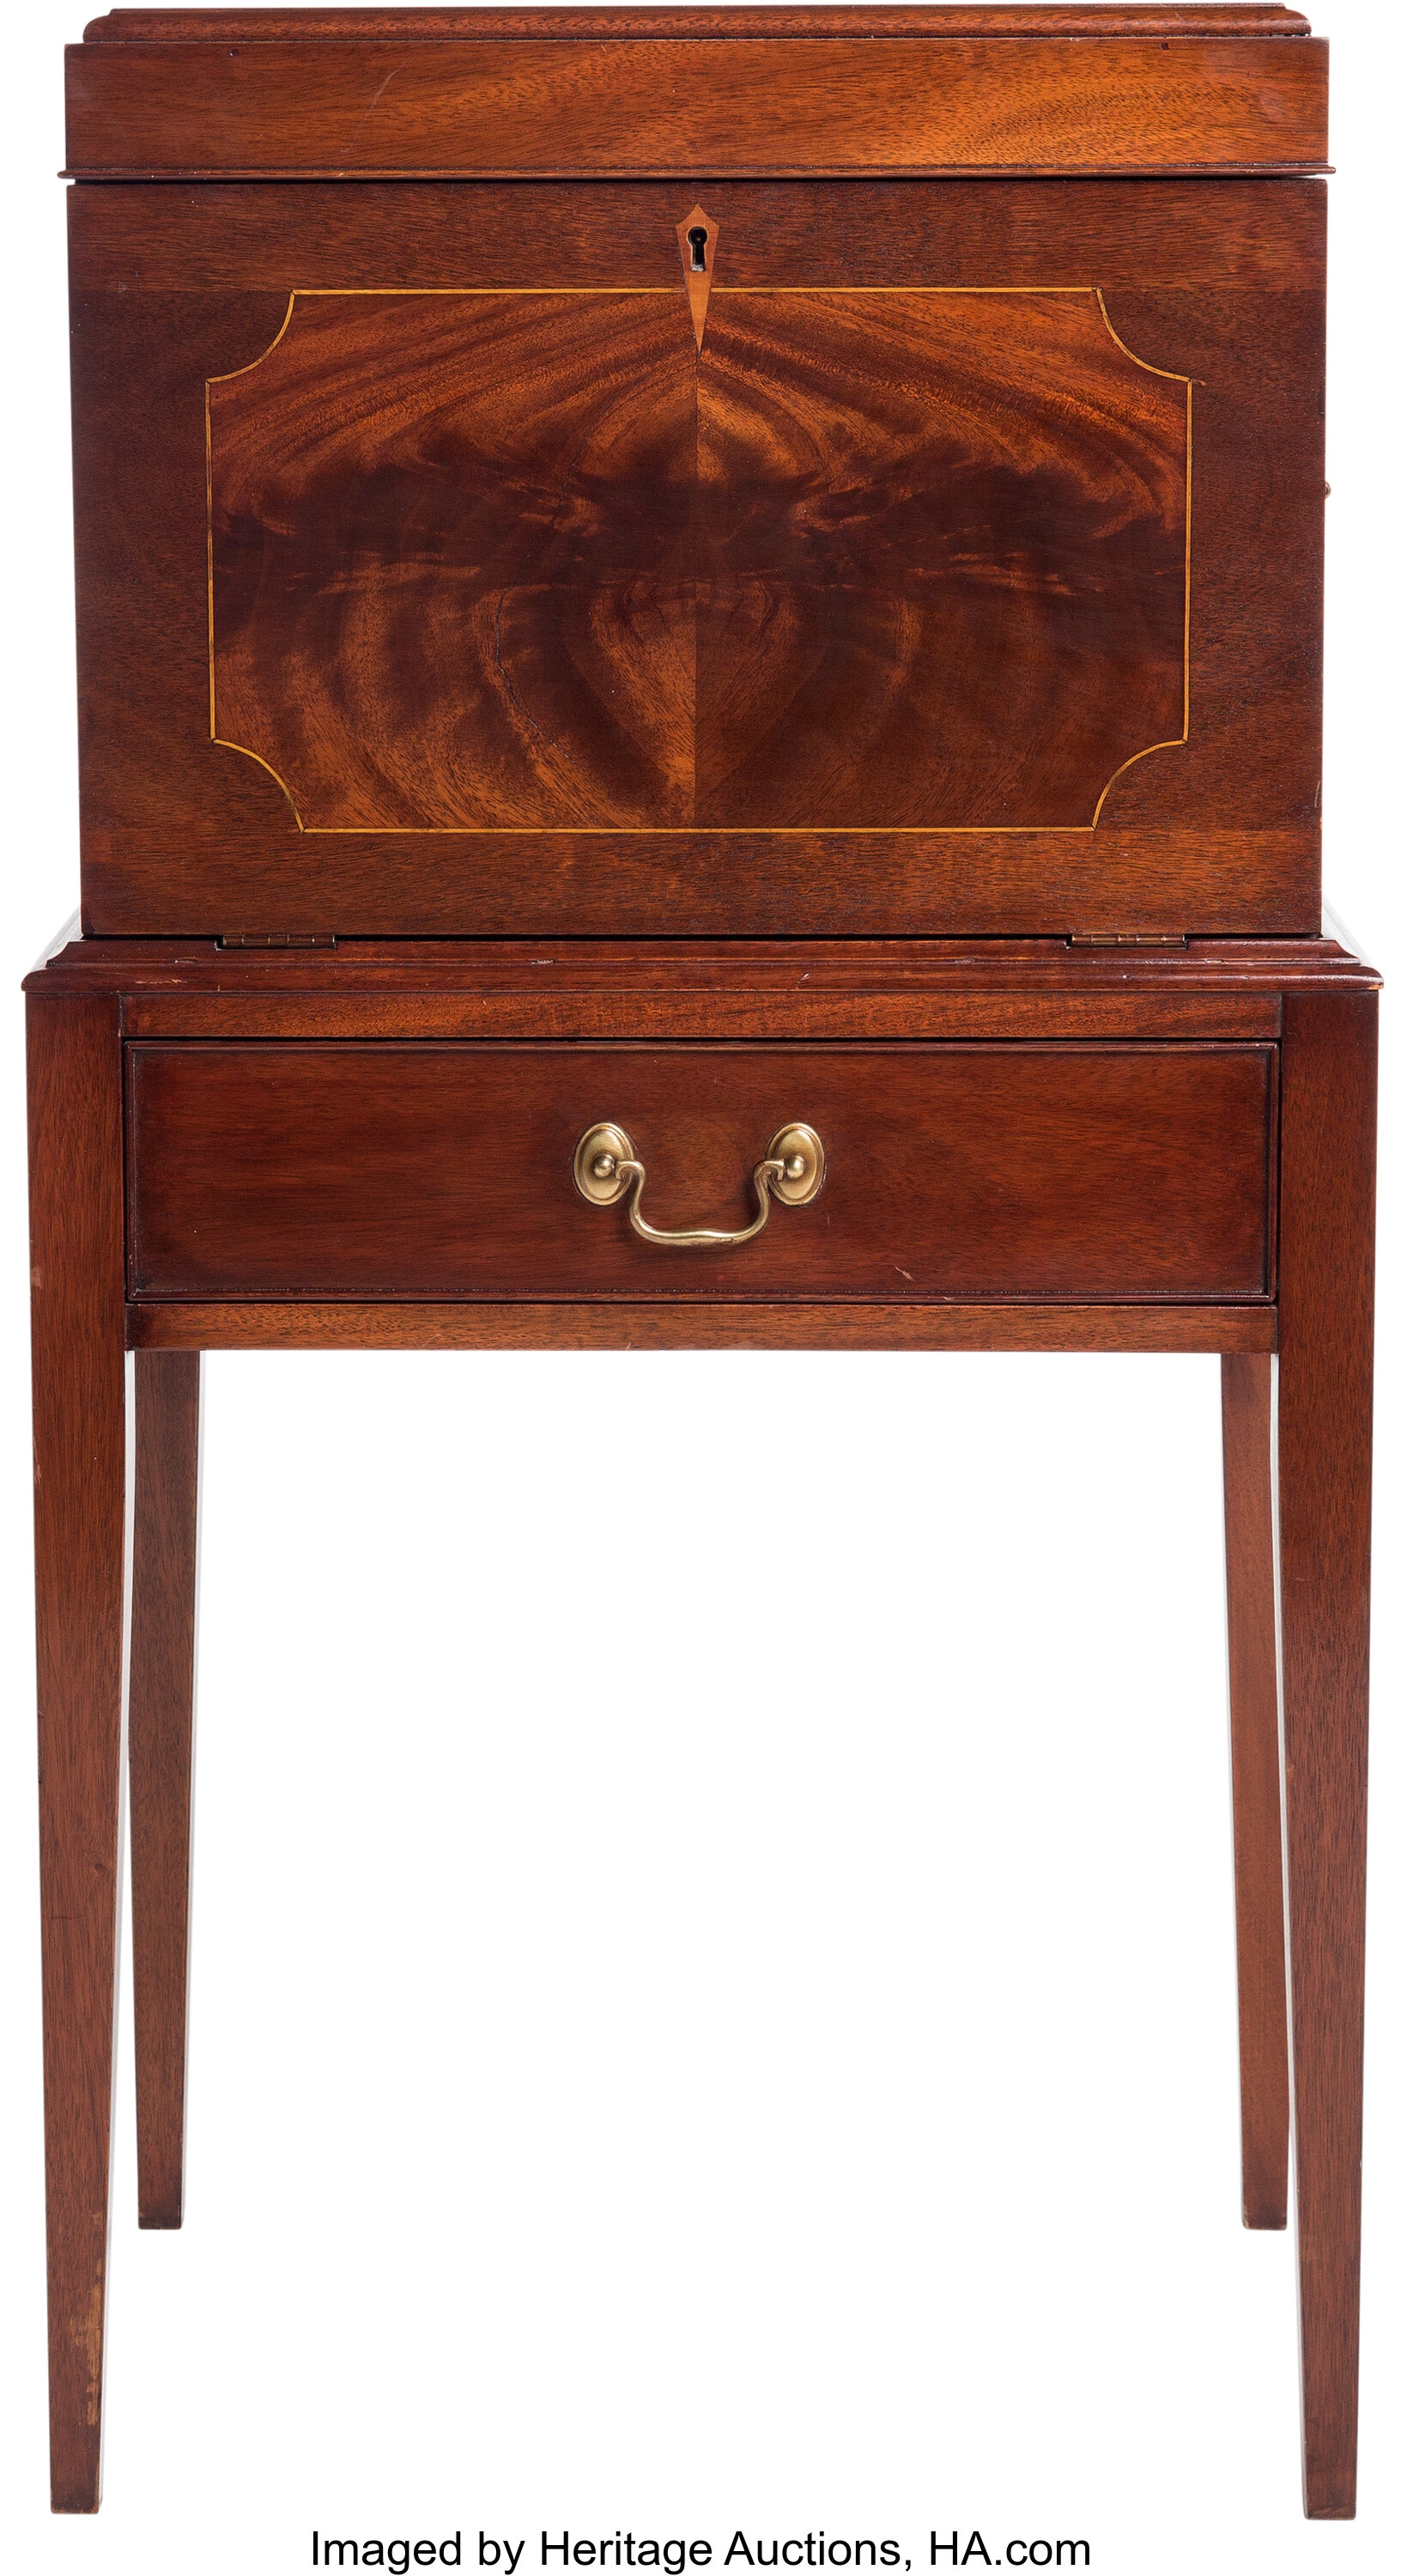 A Henkel Harris Hepplewhite Style Mahogany Silver Chest On Stand